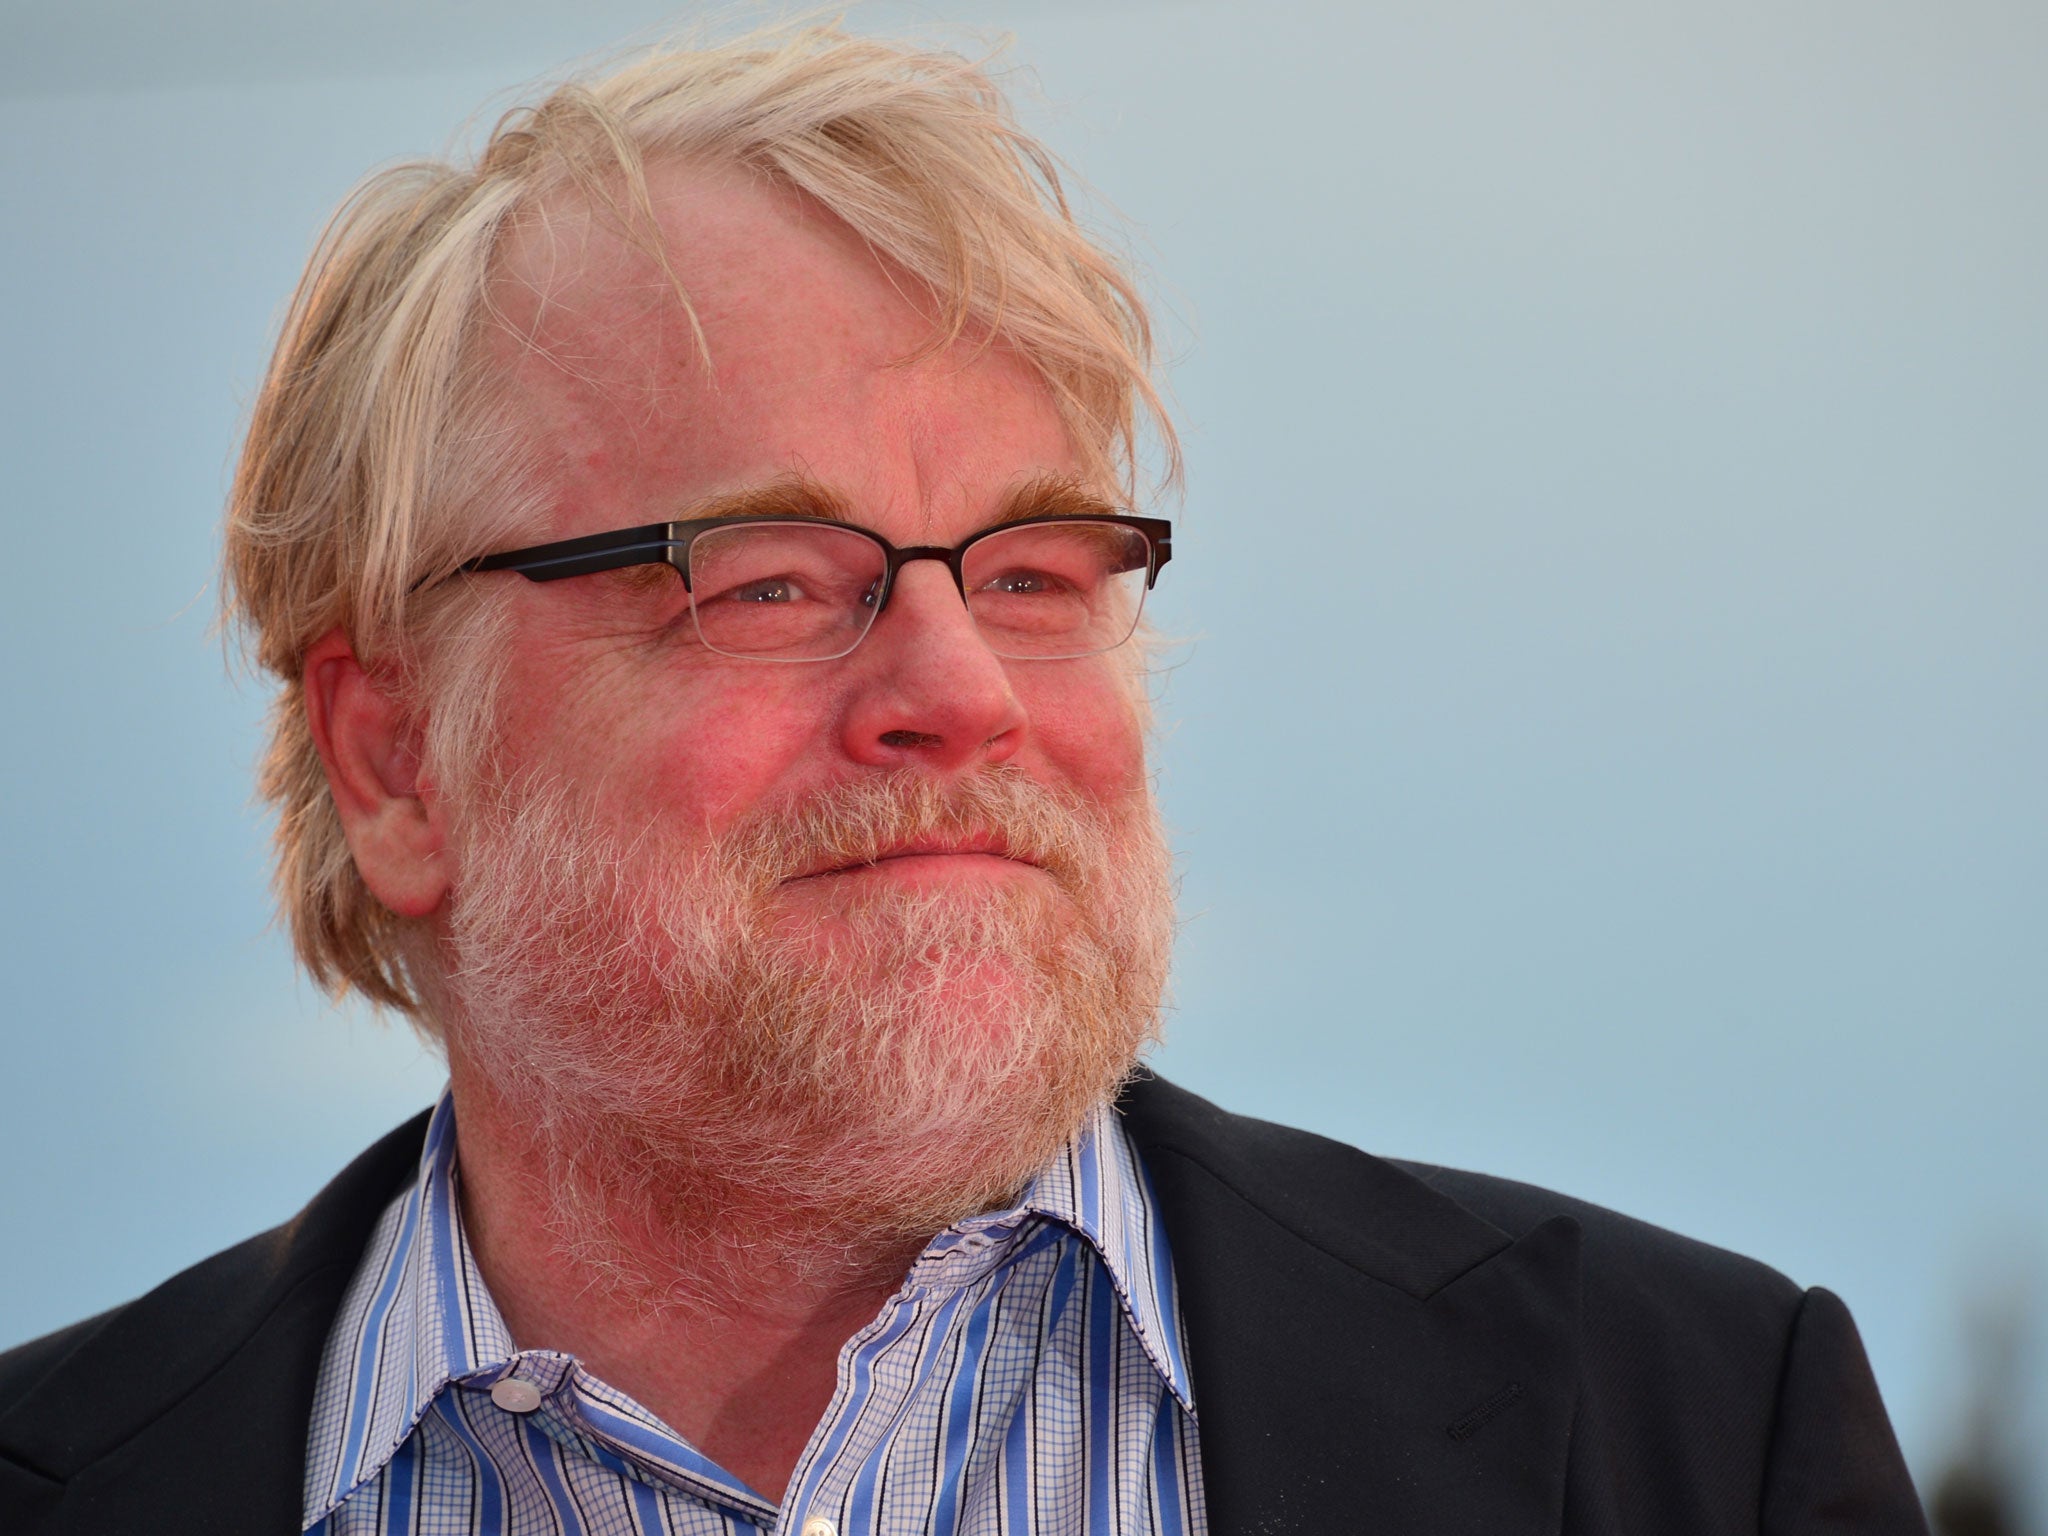 Philip Seymour Hoffman was due to star in a new comedy series called Happyish, the future of which now looks uncertain